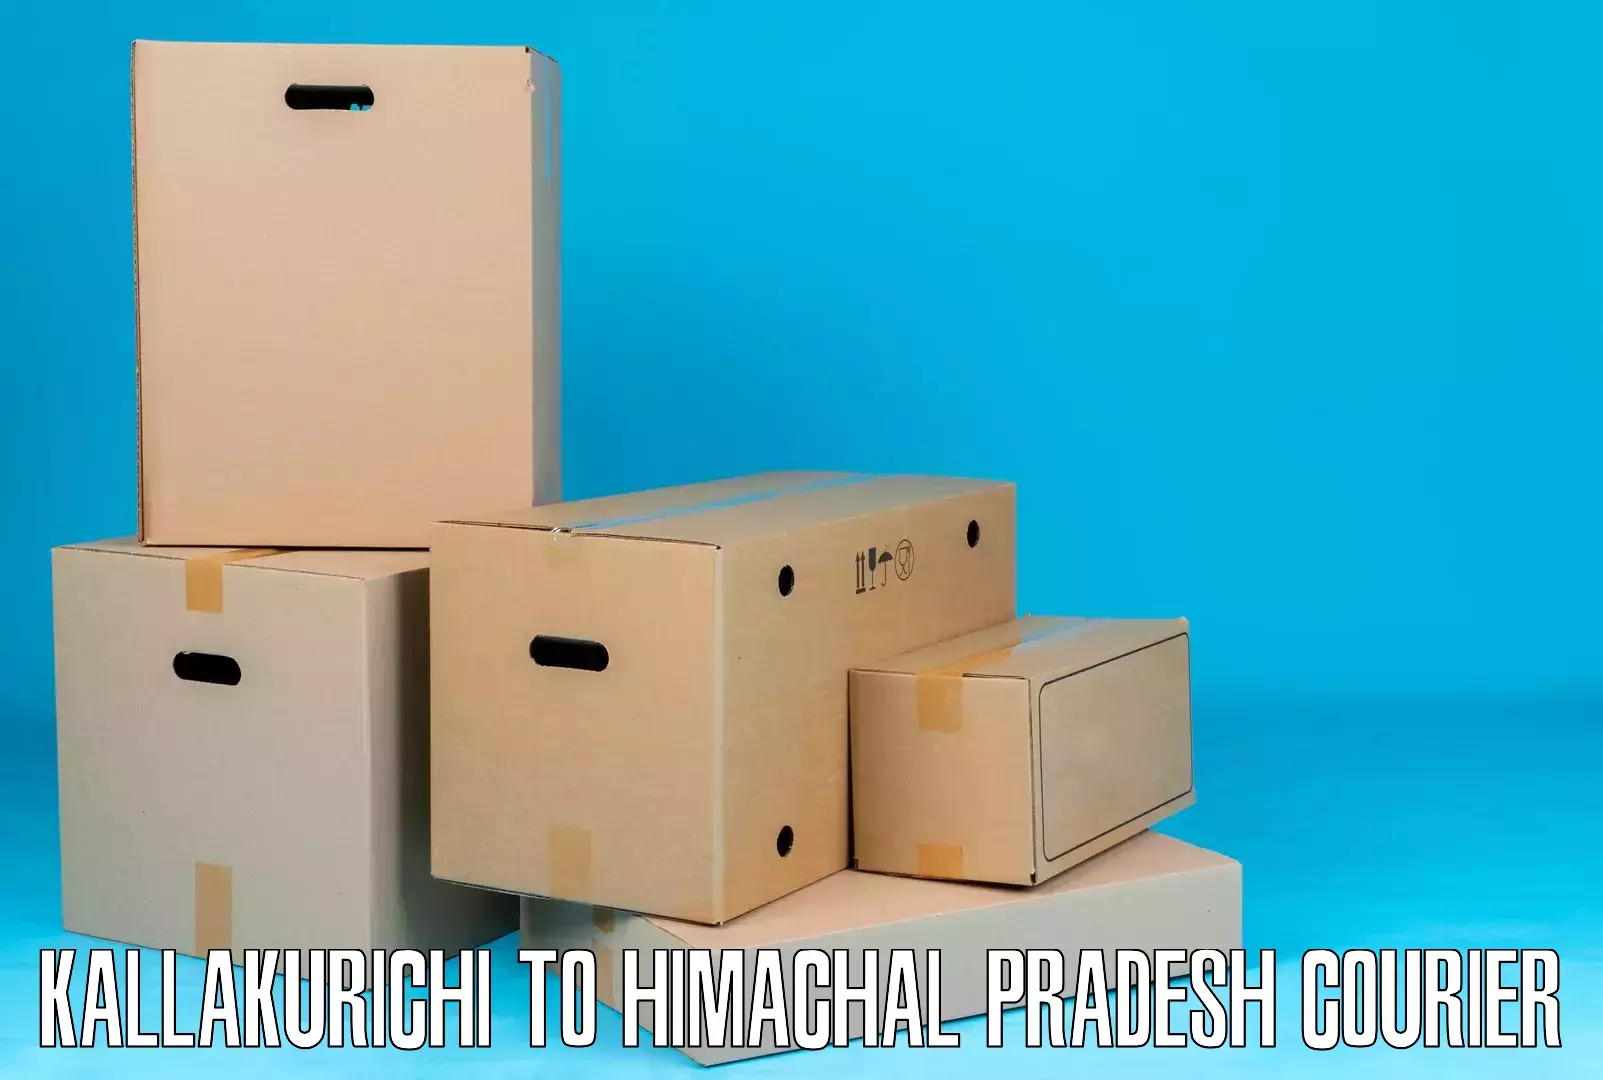 Dynamic courier operations Kallakurichi to Chachyot